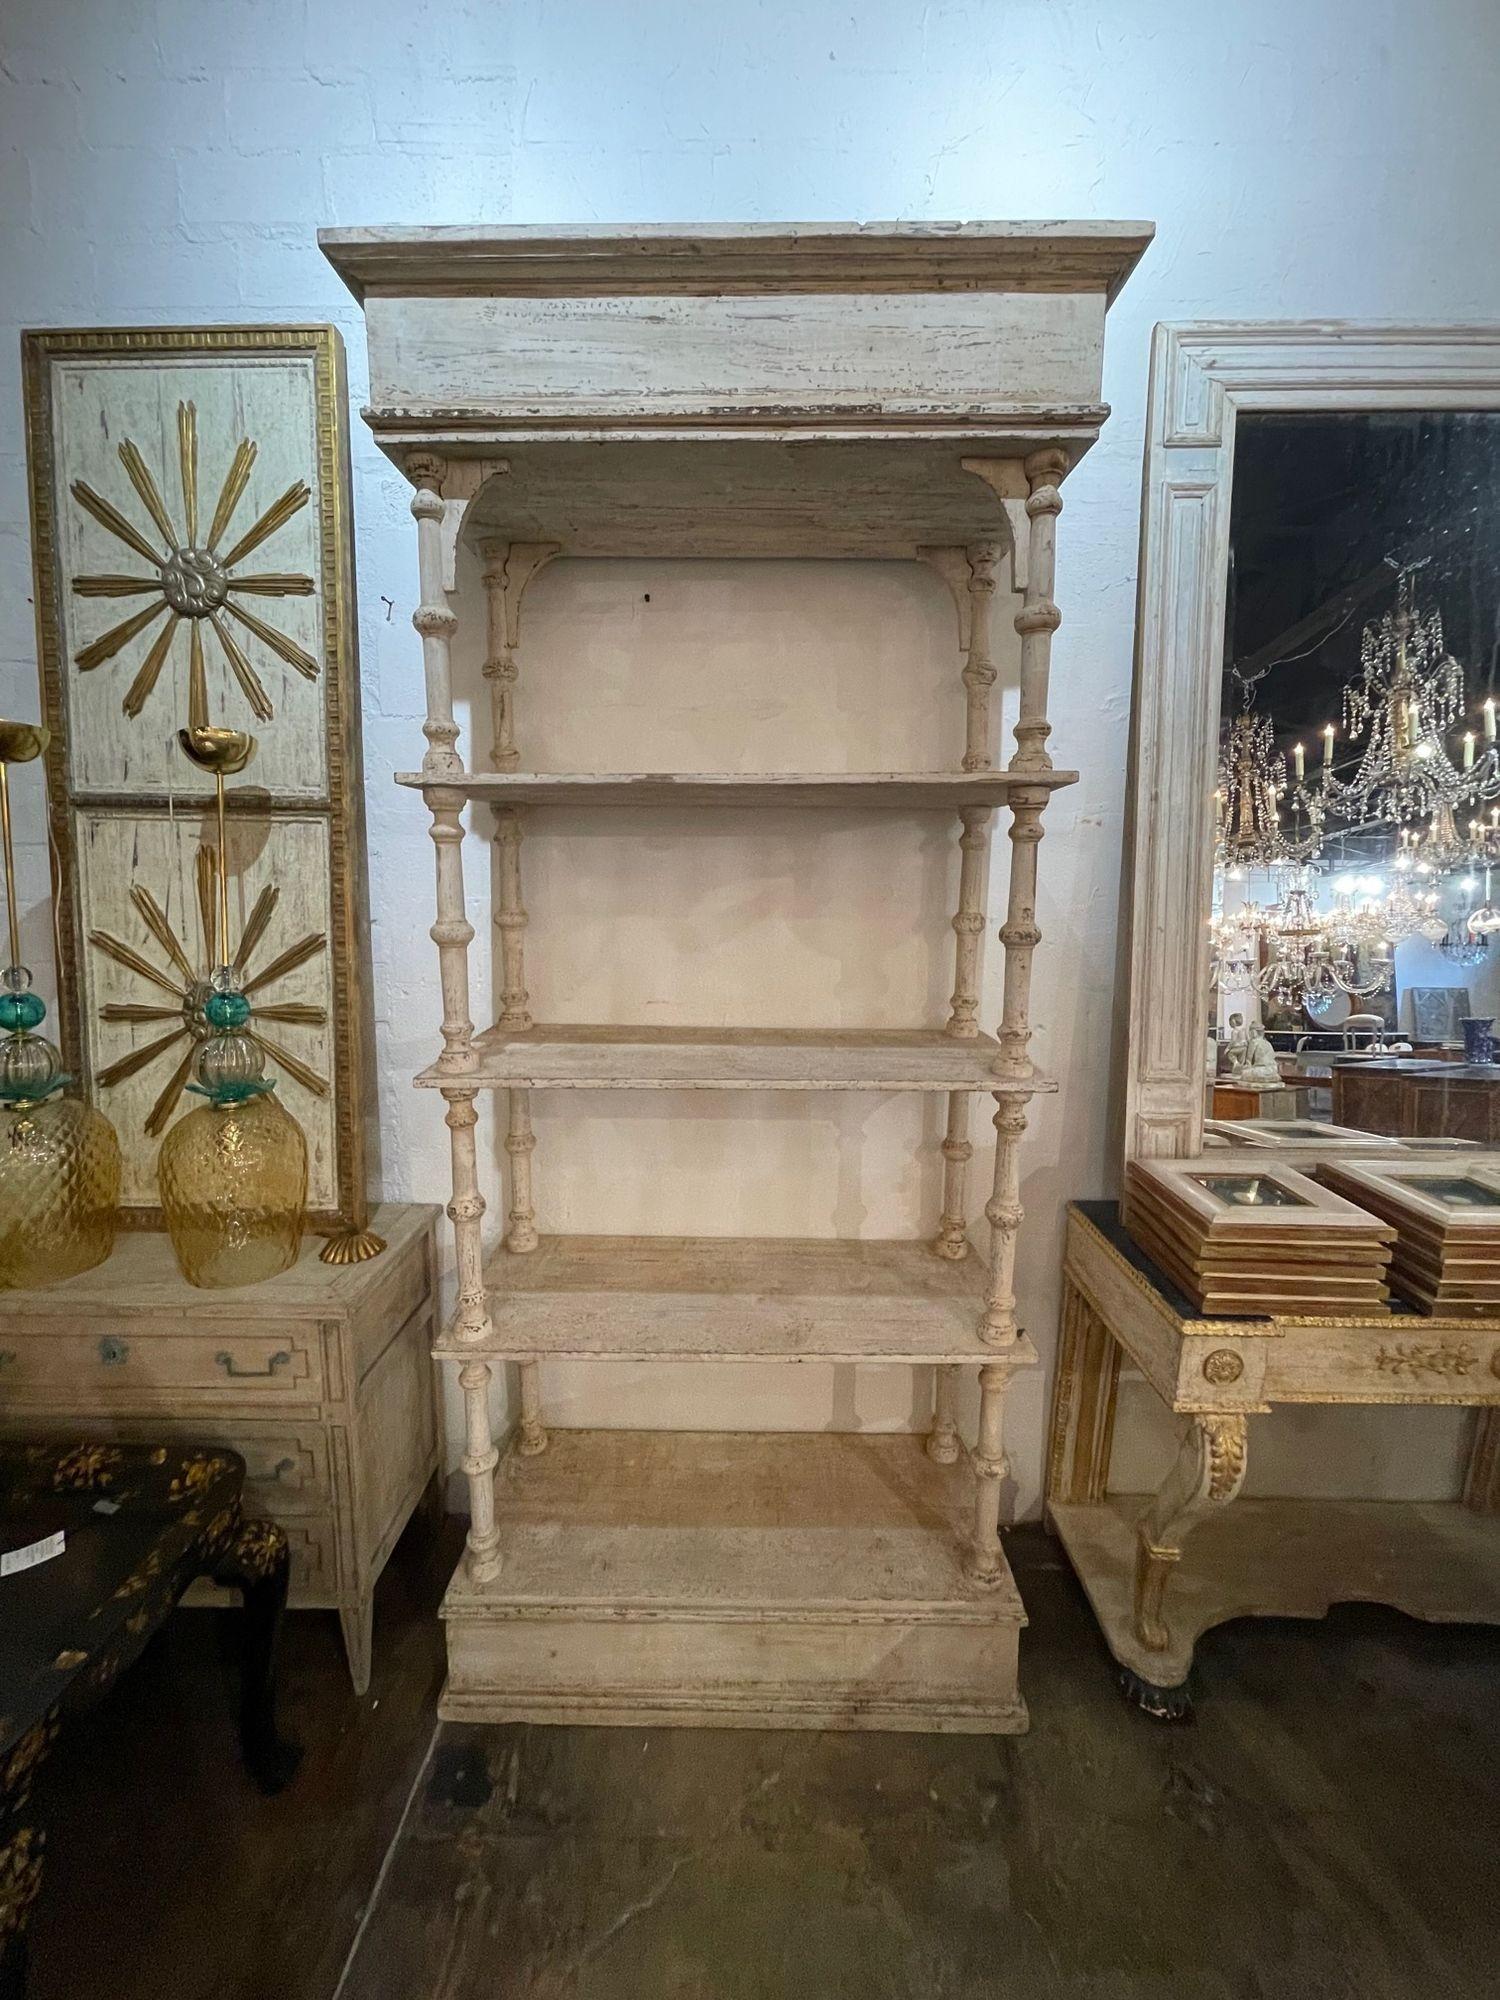 Handsome large scale vintage Italian carved and painted display shelf. Nice patina on this piece and lots of room to display books or collections. Beautiful!